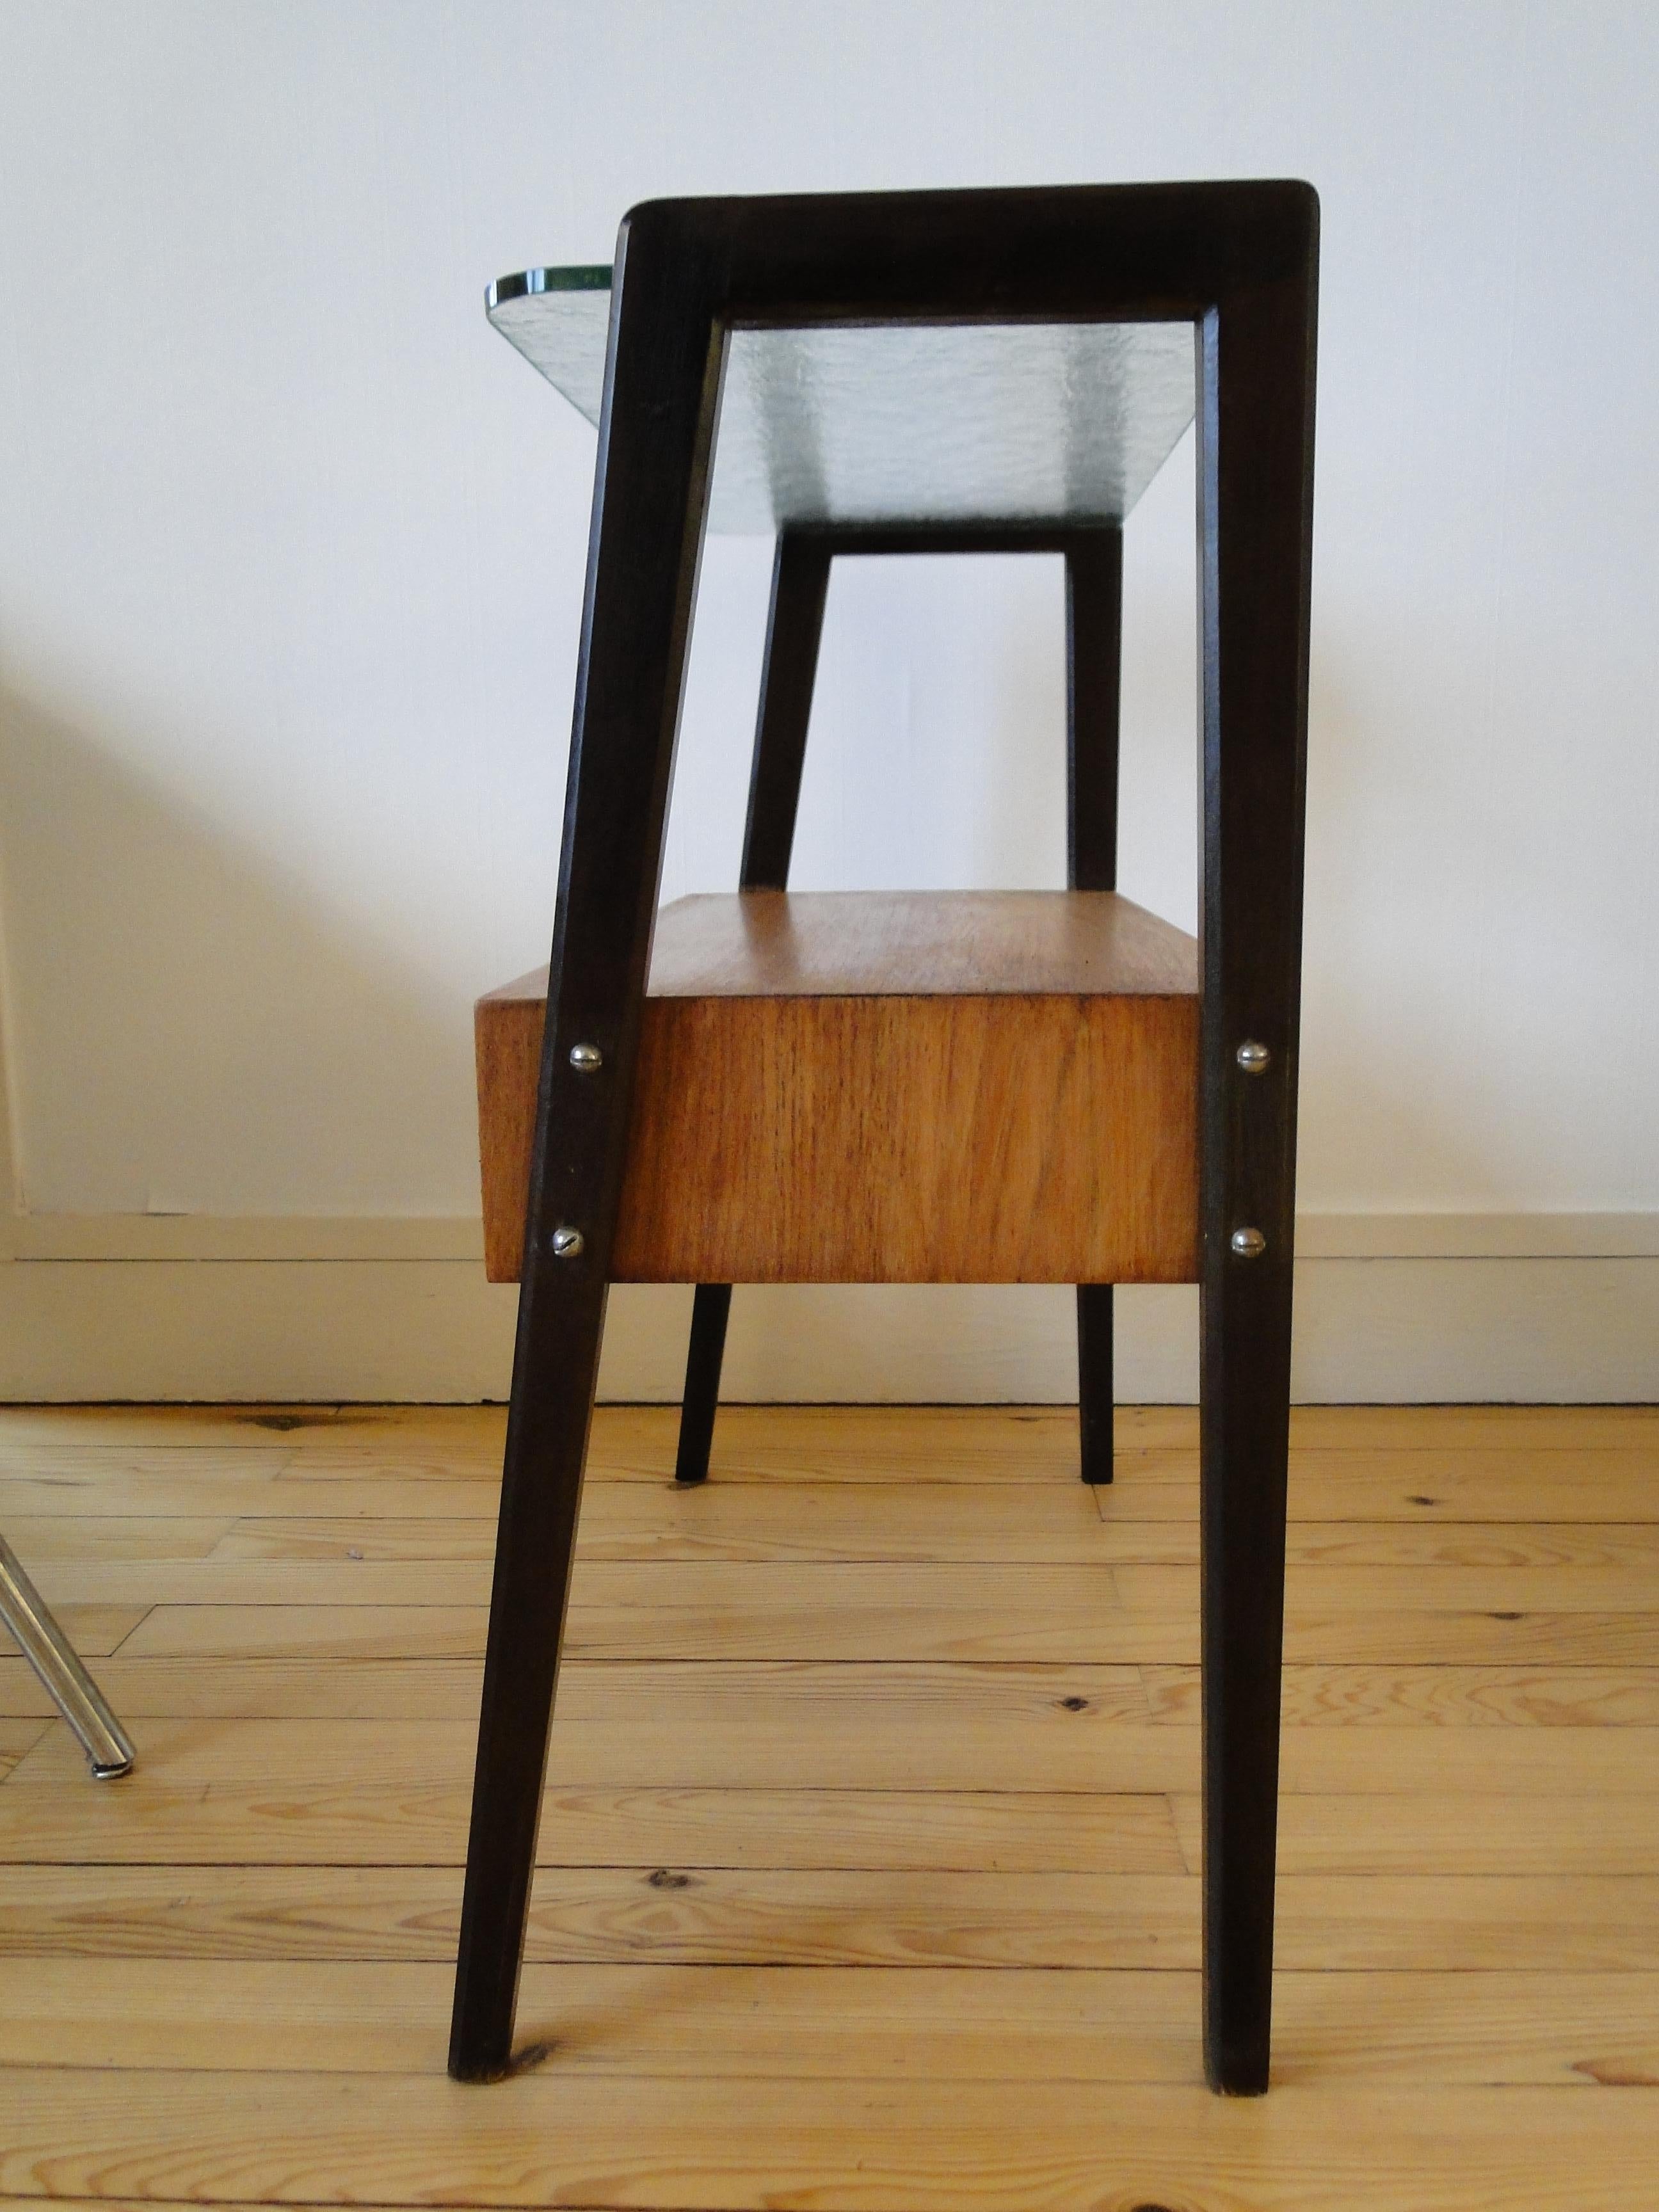 20th Century Scandinavian Entrance or Apoint Furniture in Teak Table Side Table Bedside 